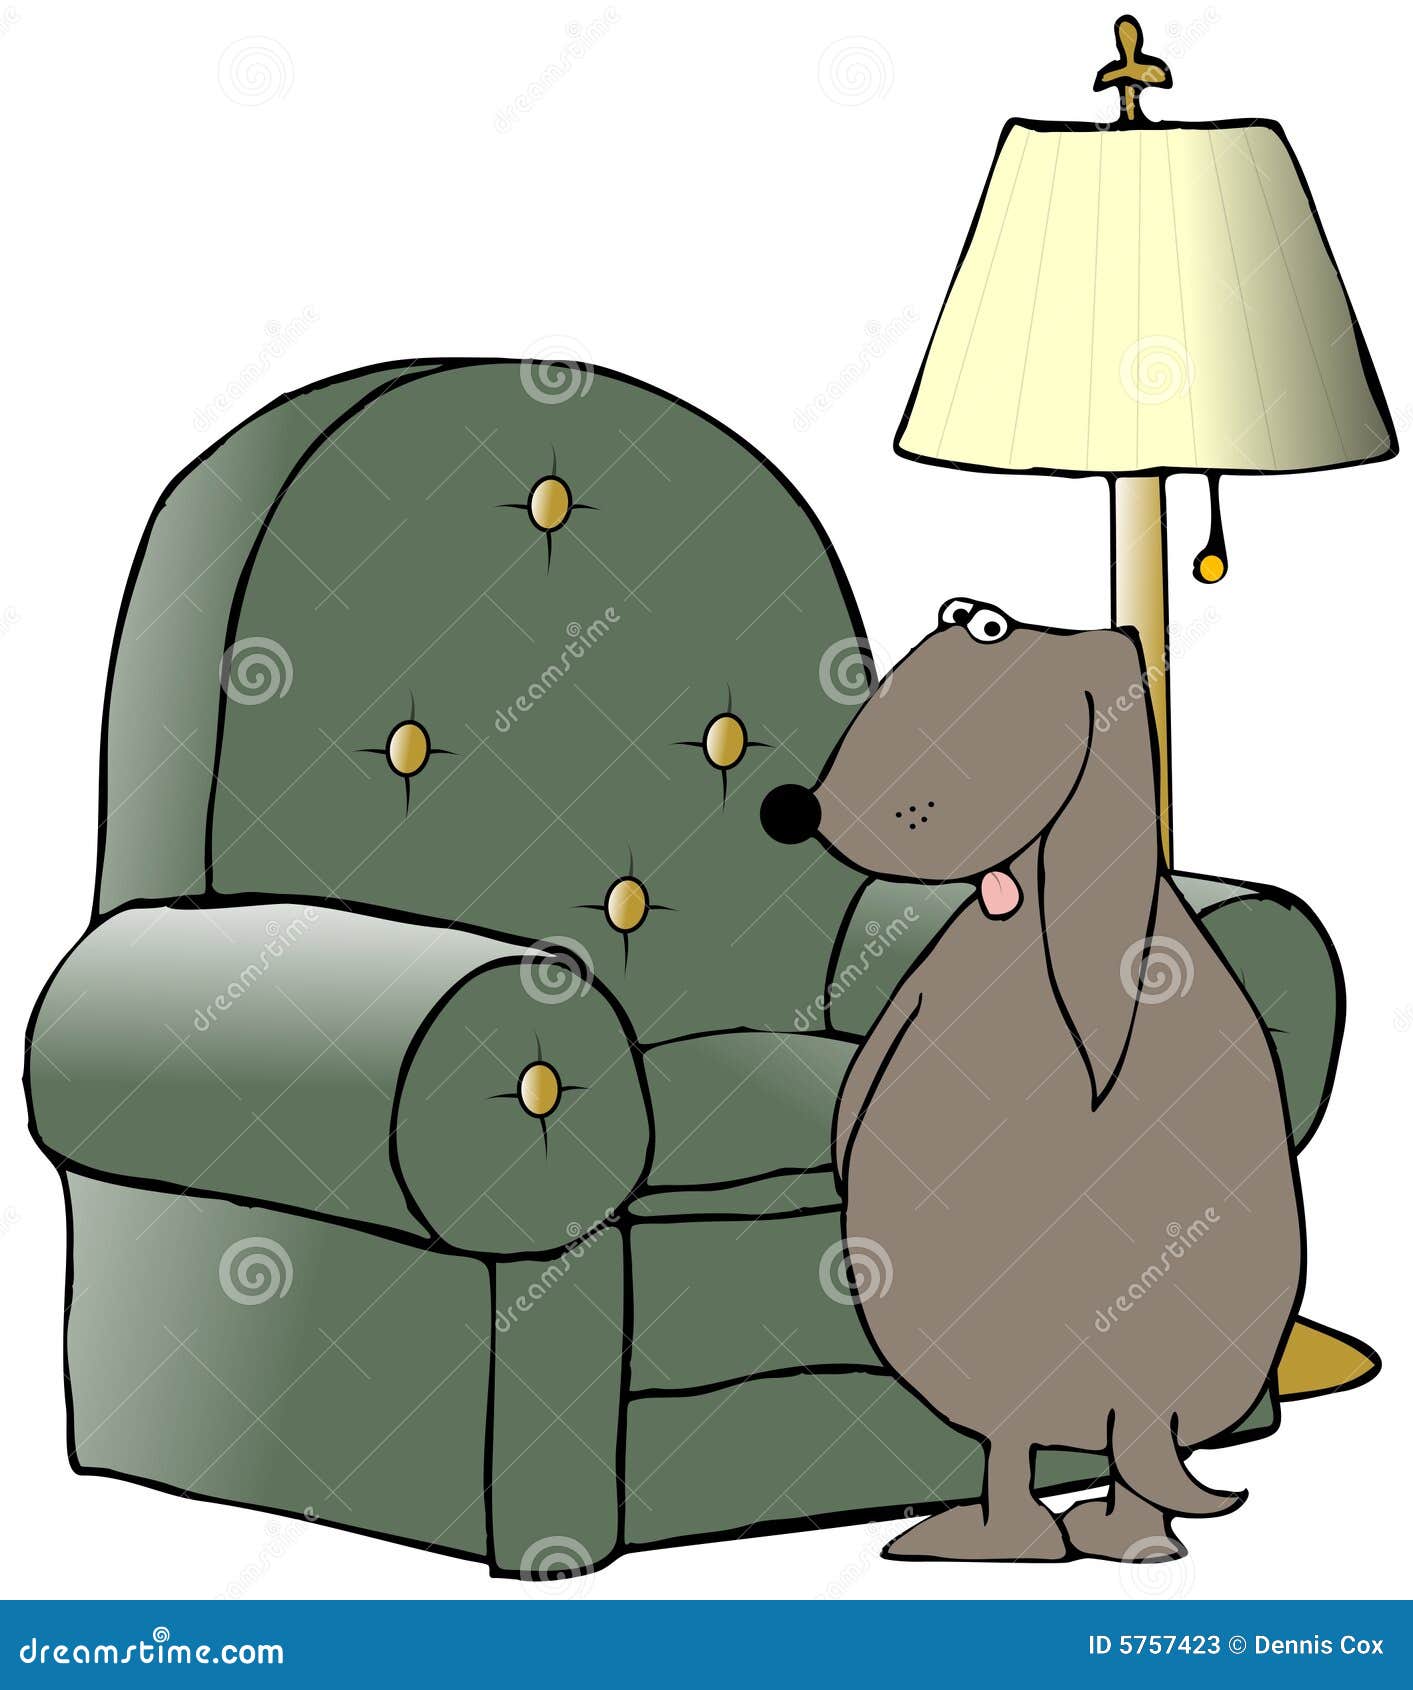 Dog Peeing on a Chair stock illustration. Illustration of chair - 5757423